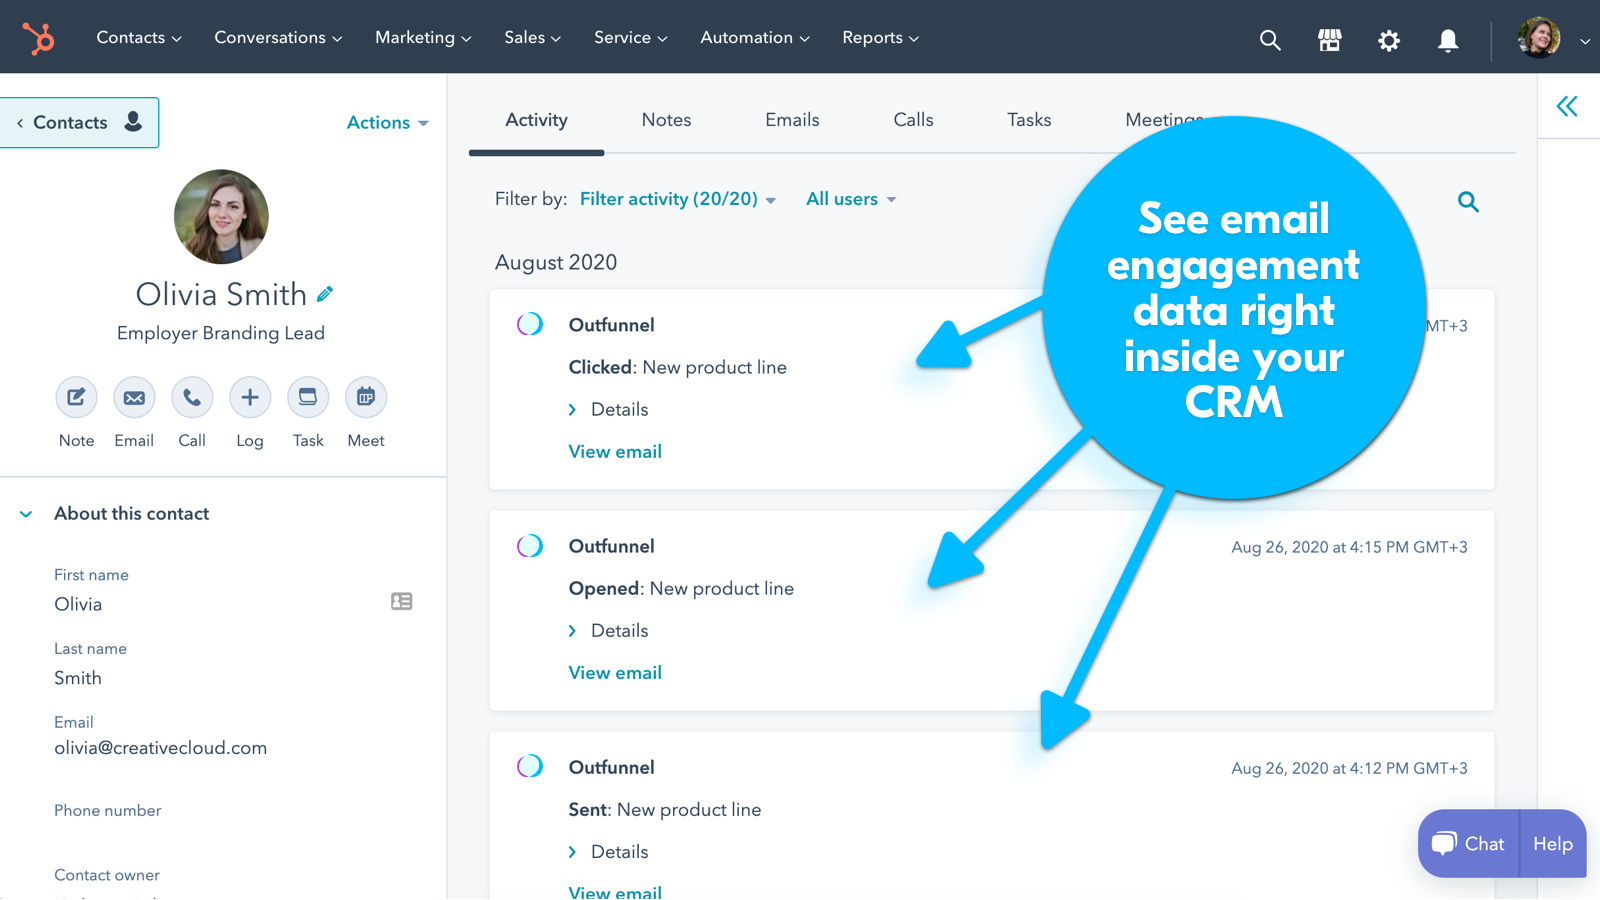 see email engagement data in your CRM